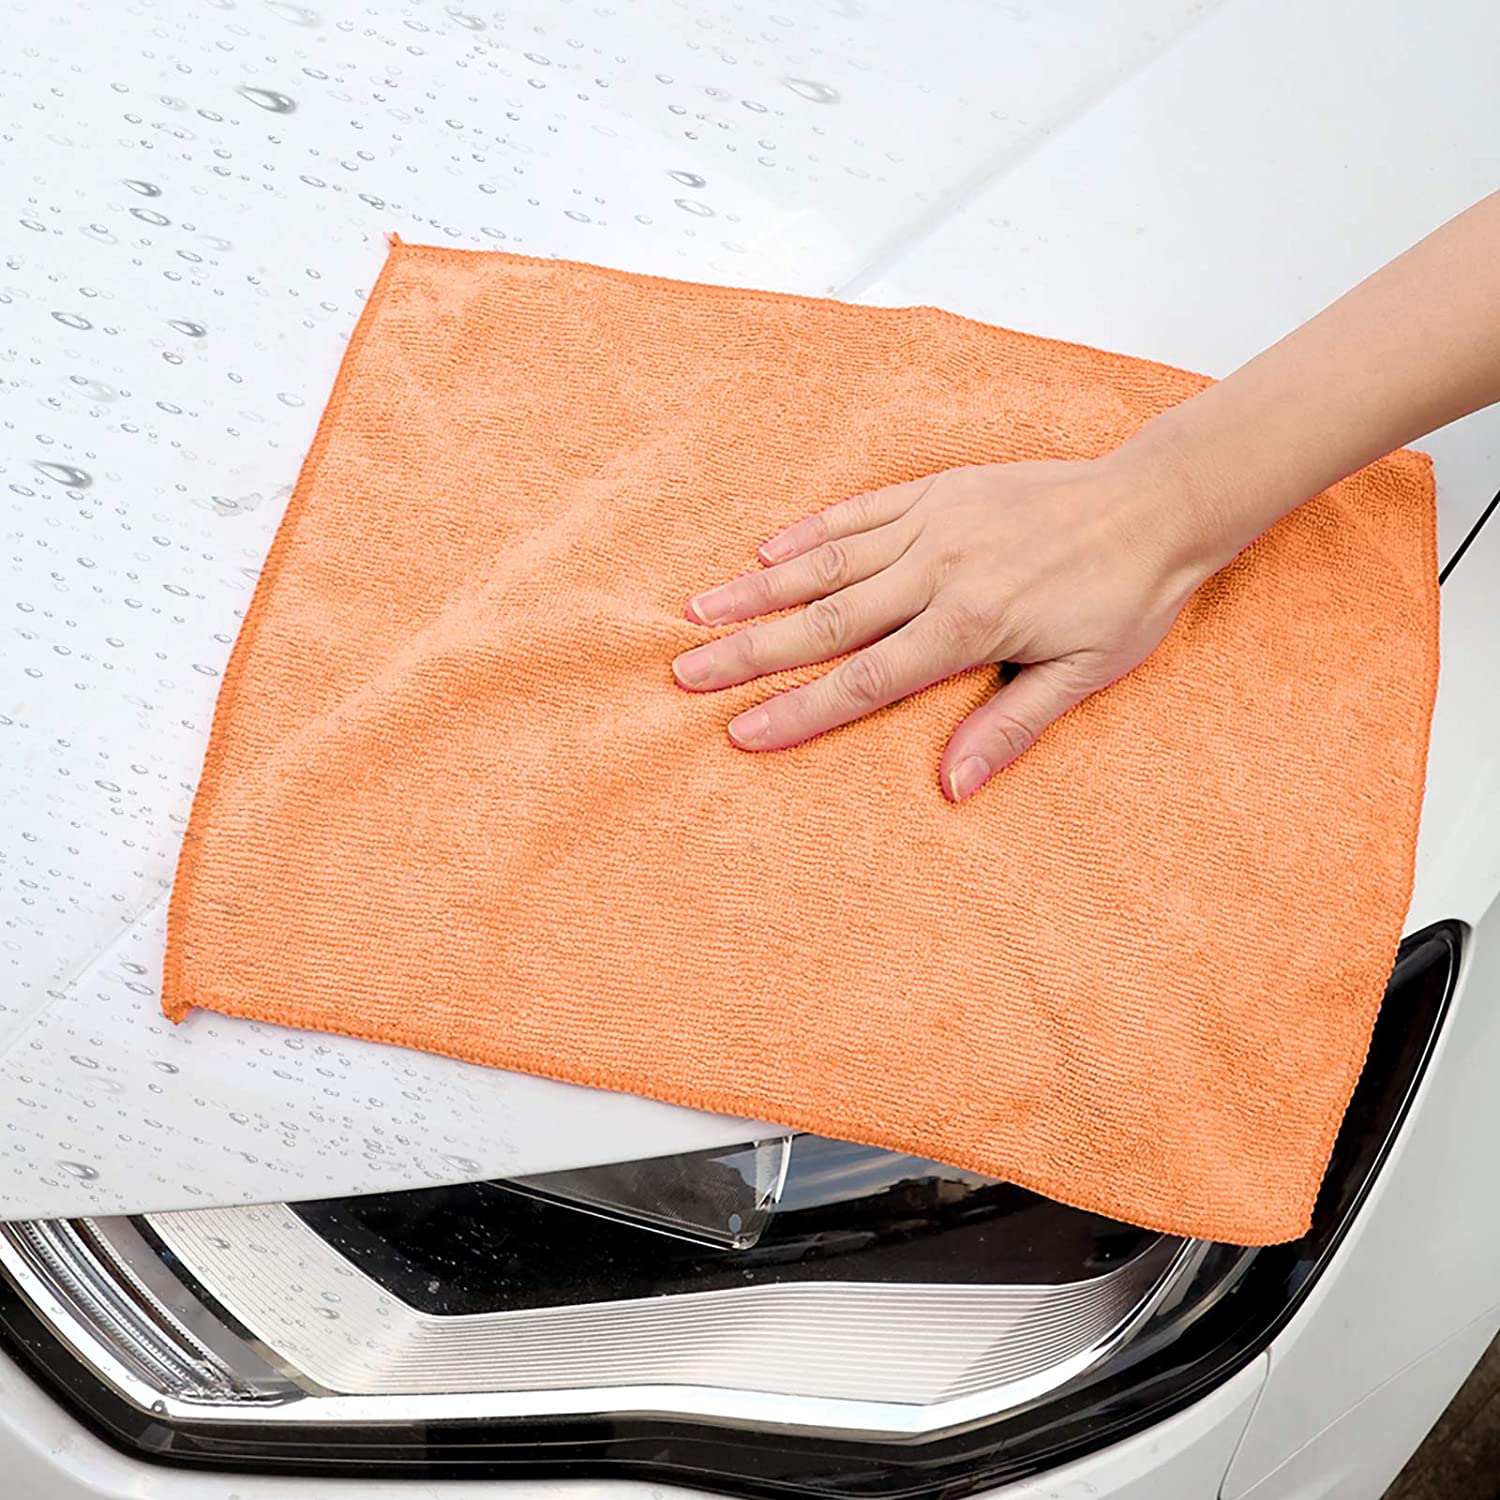 WHAT TOWEL IS BETTER FOR WASH CAR ?